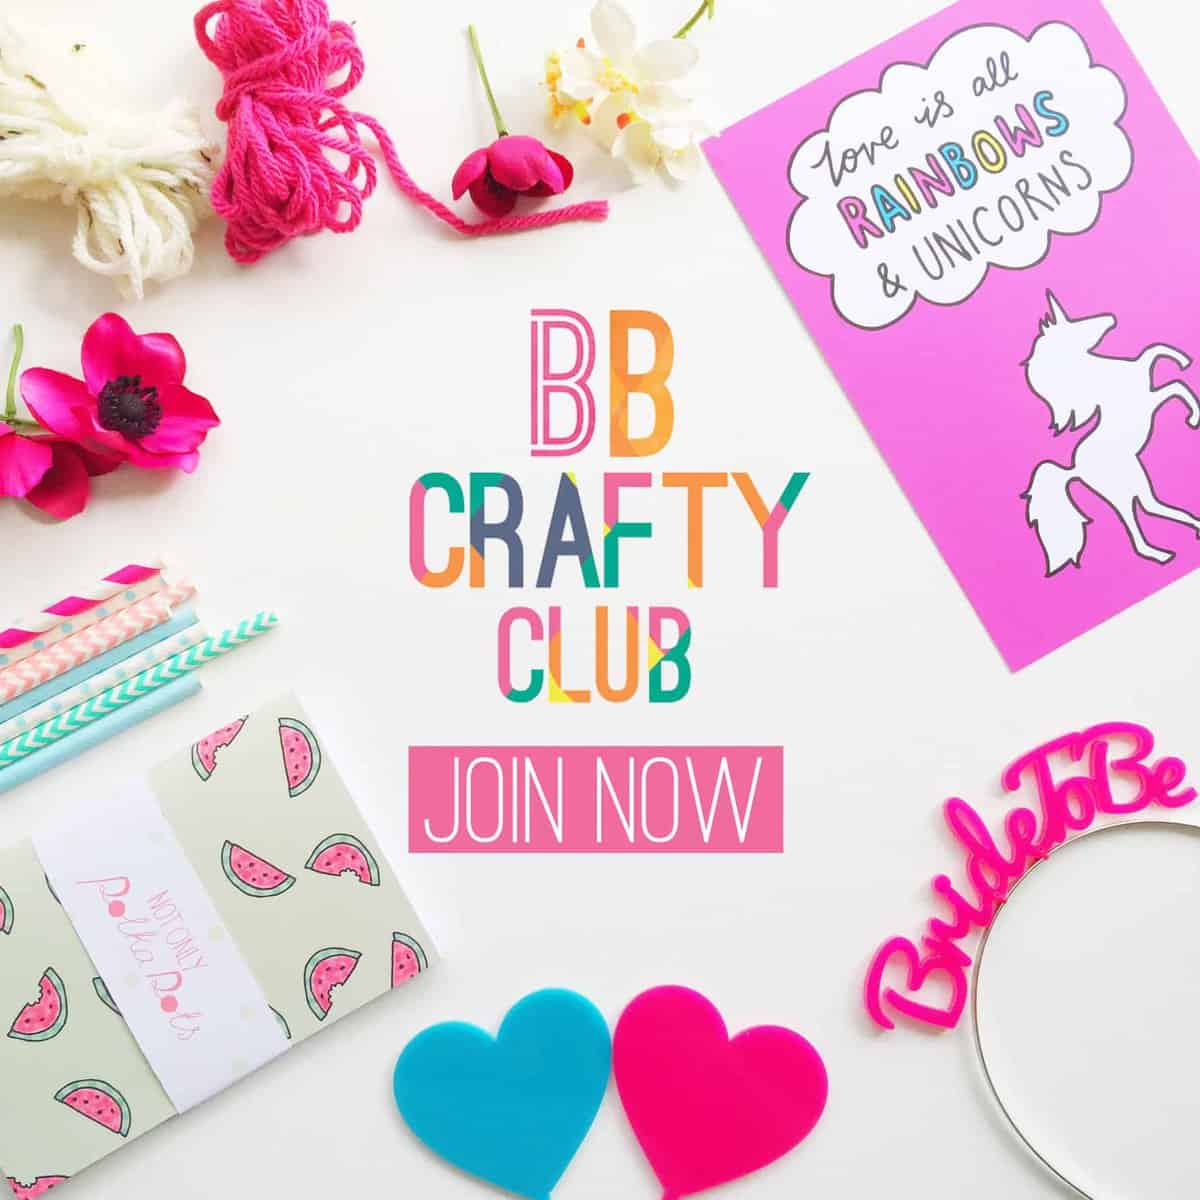 BB Crafty Club Join Now